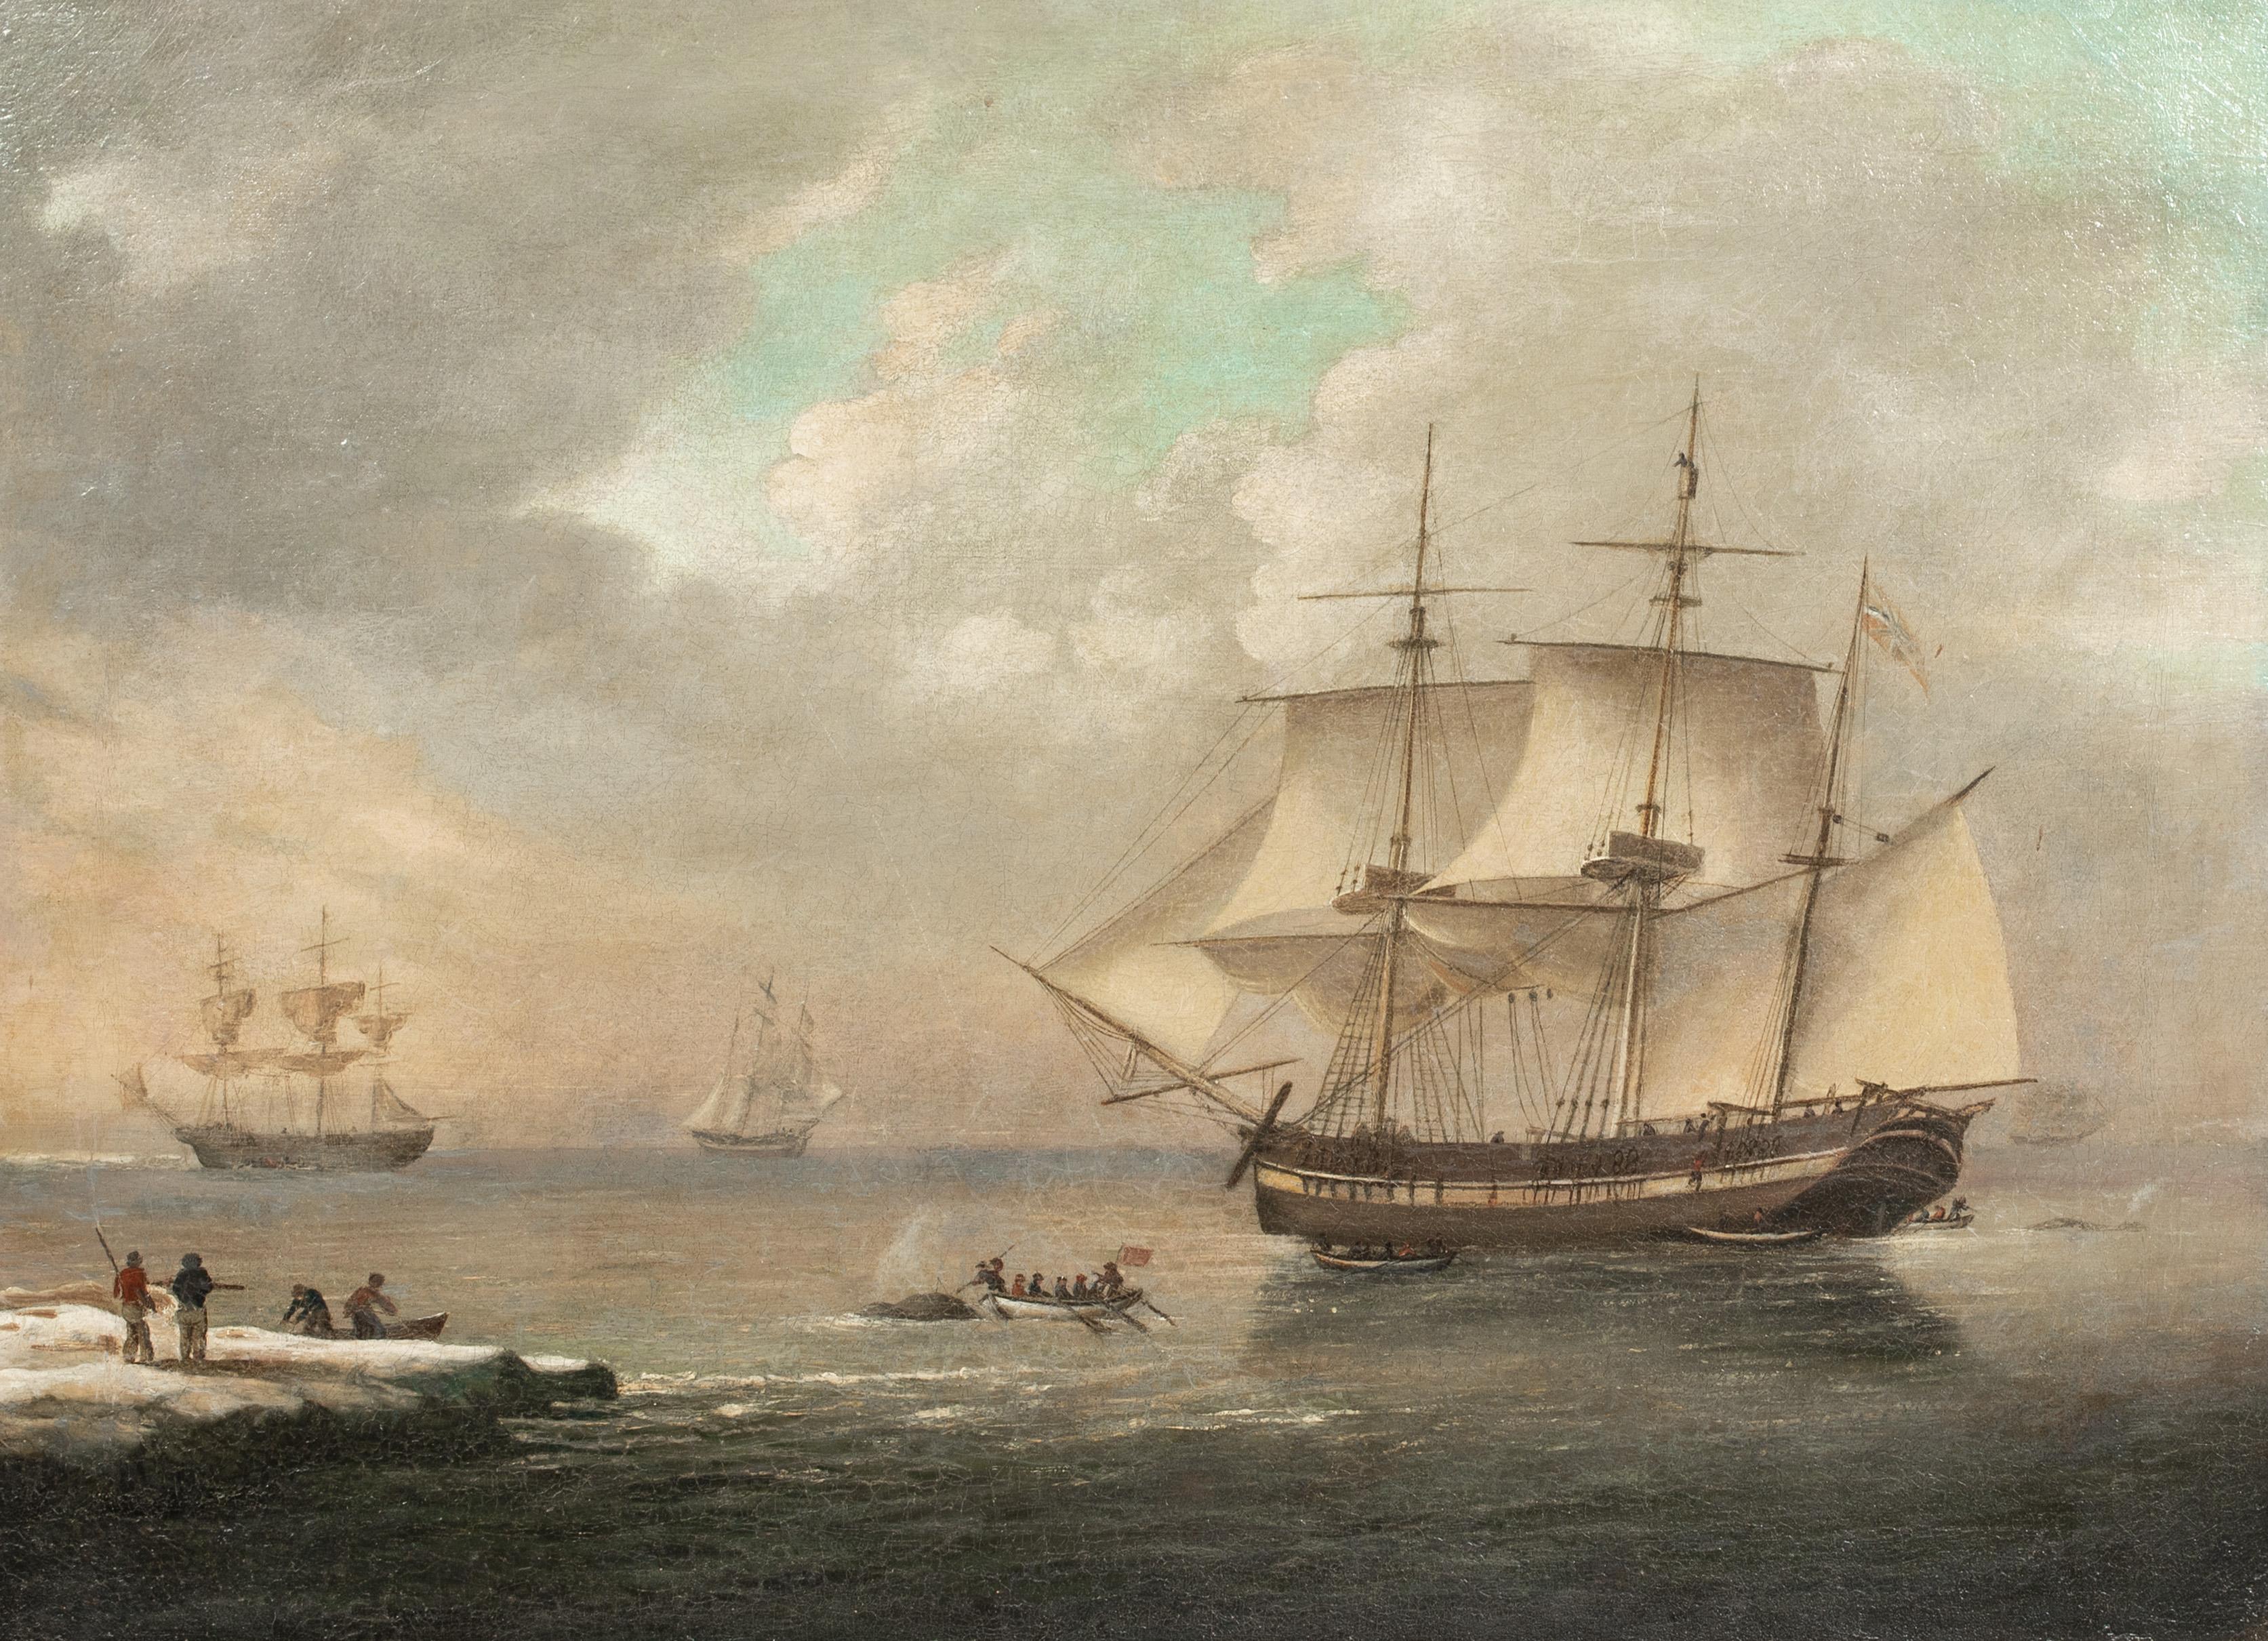 18th century whaling ships